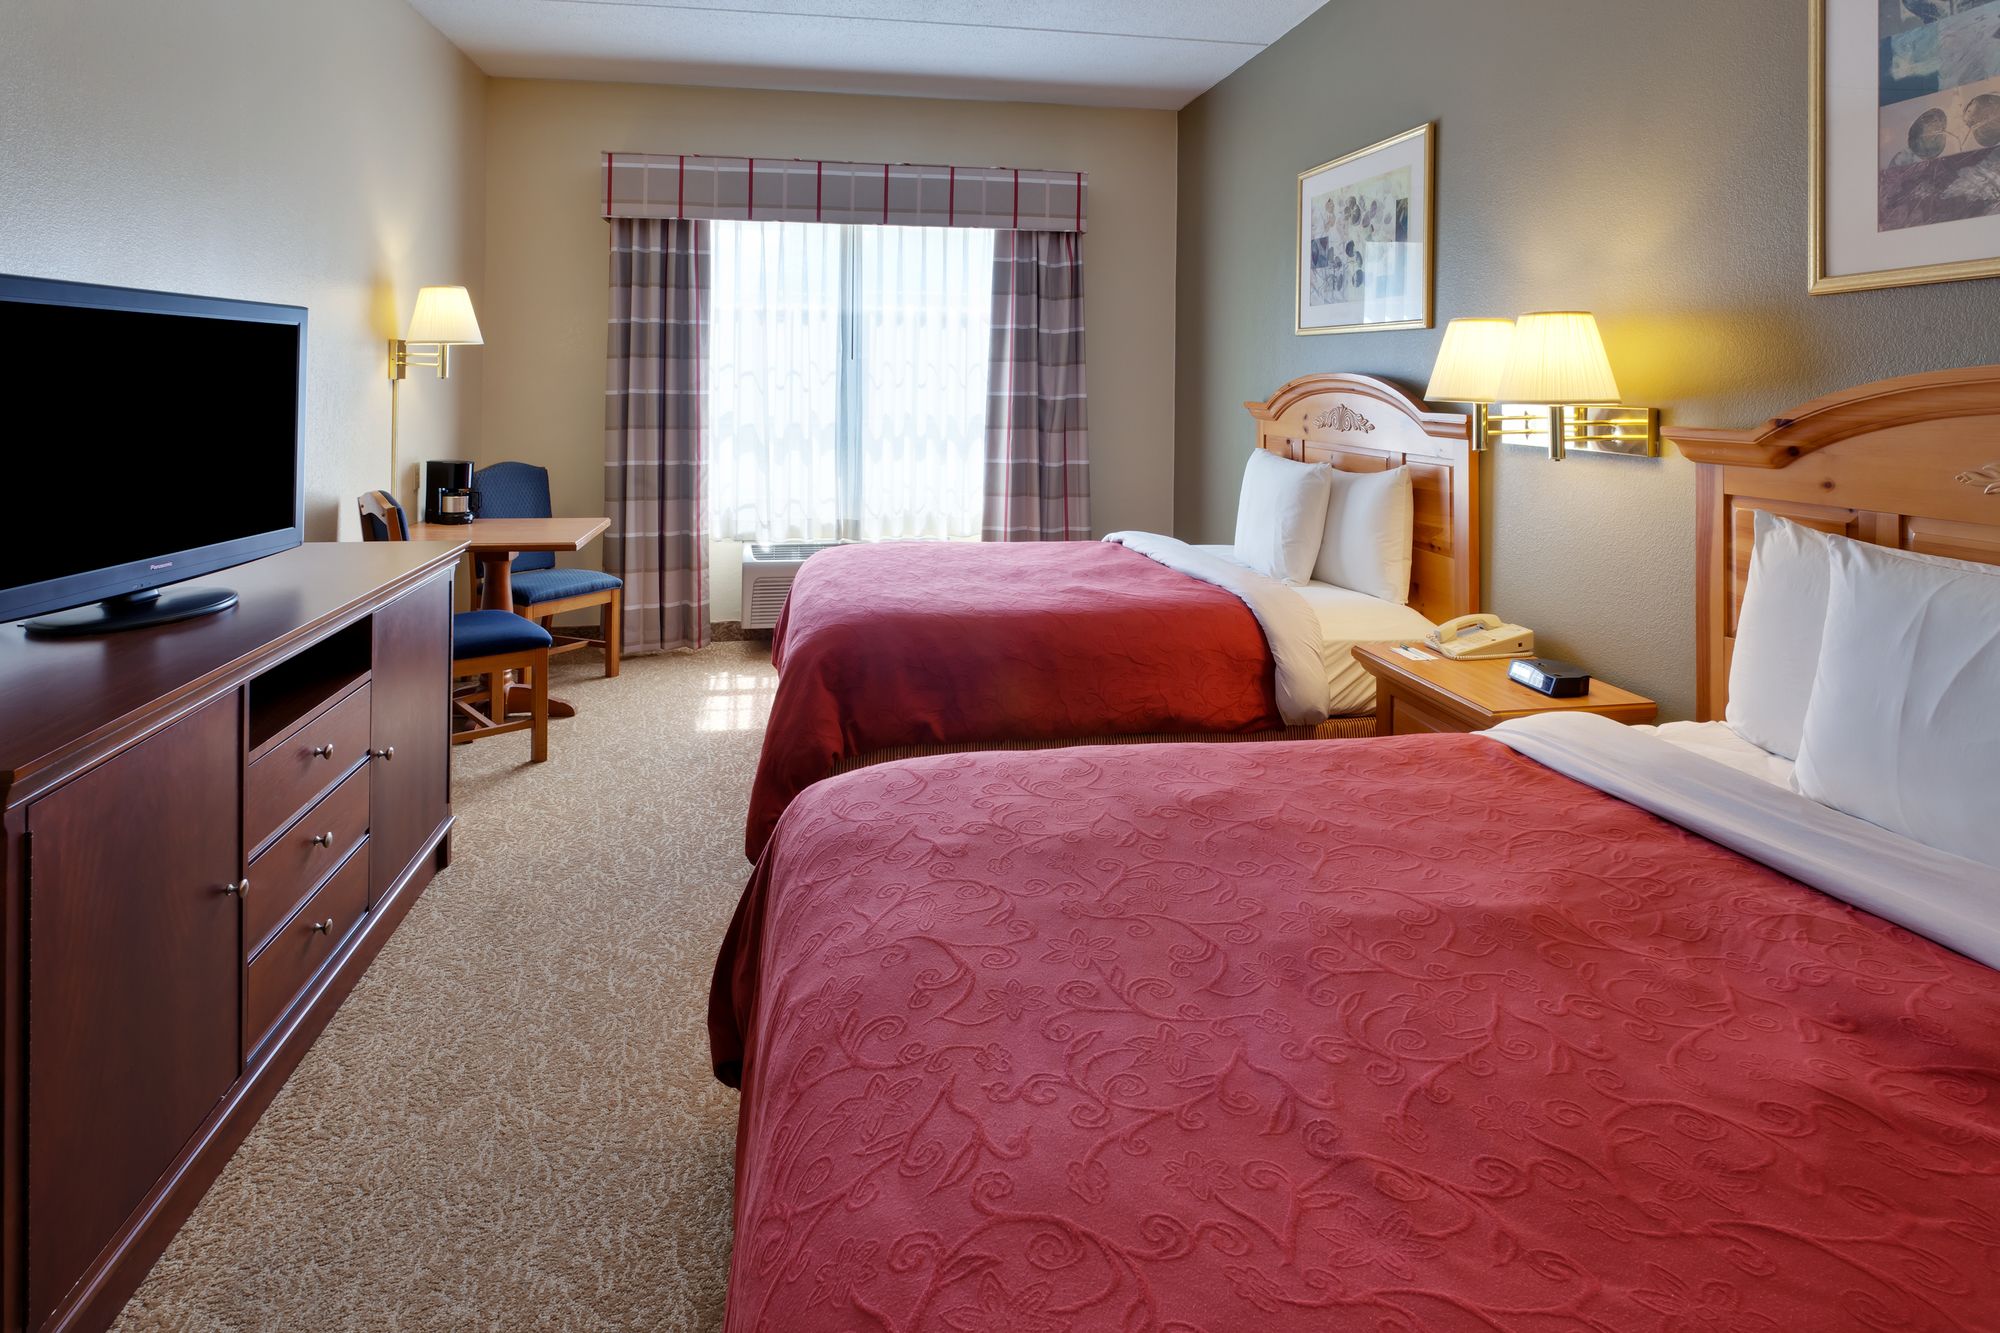 Country Inn & Suites by Radisson, Mount Morris, NY